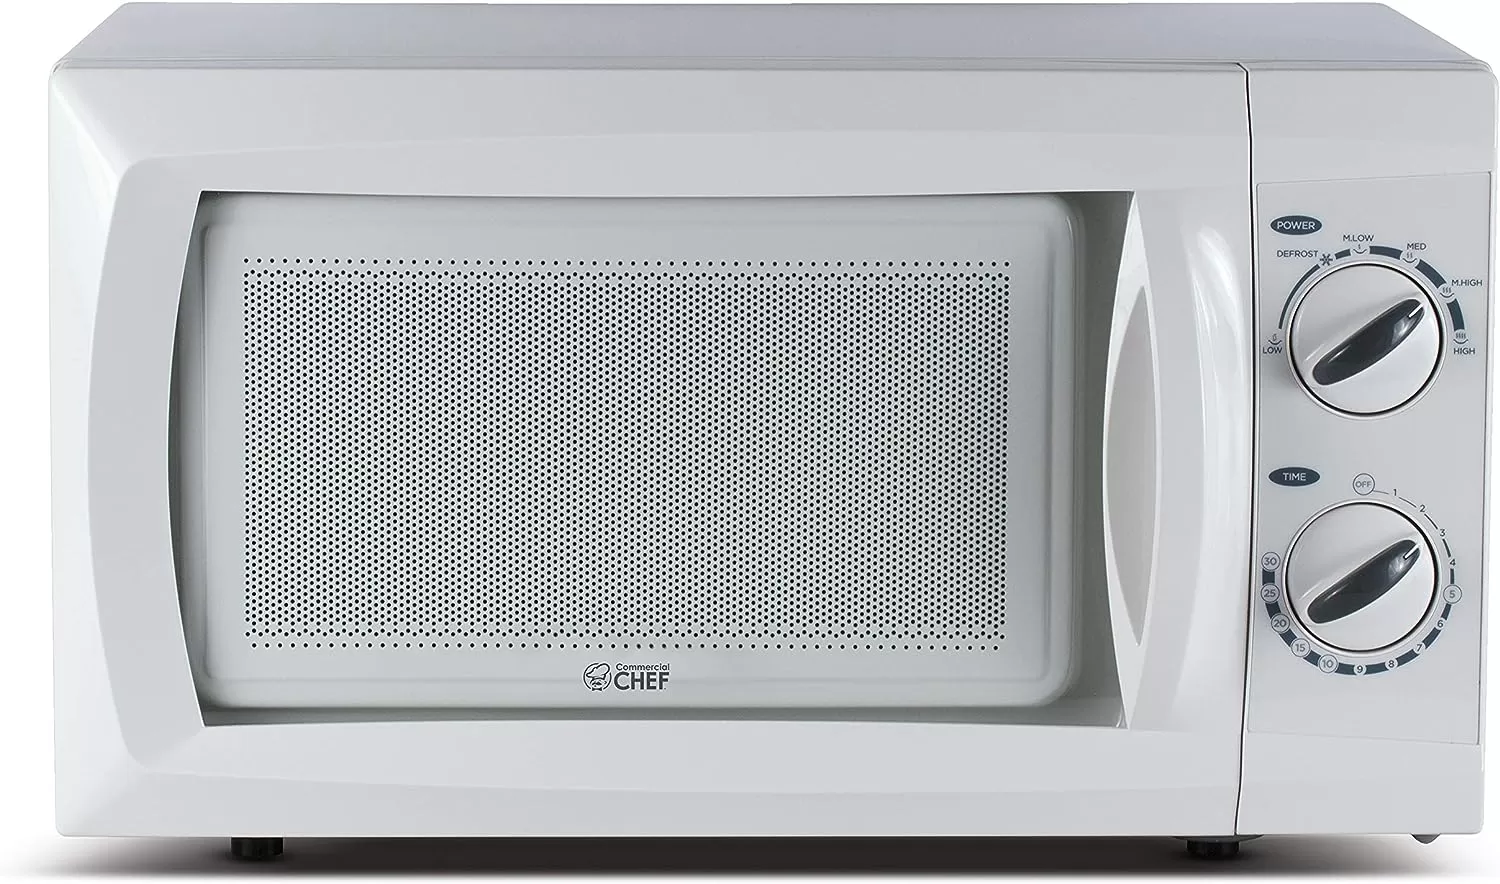 commercial chef chm660 counter top microwave 0.6 cubic feet